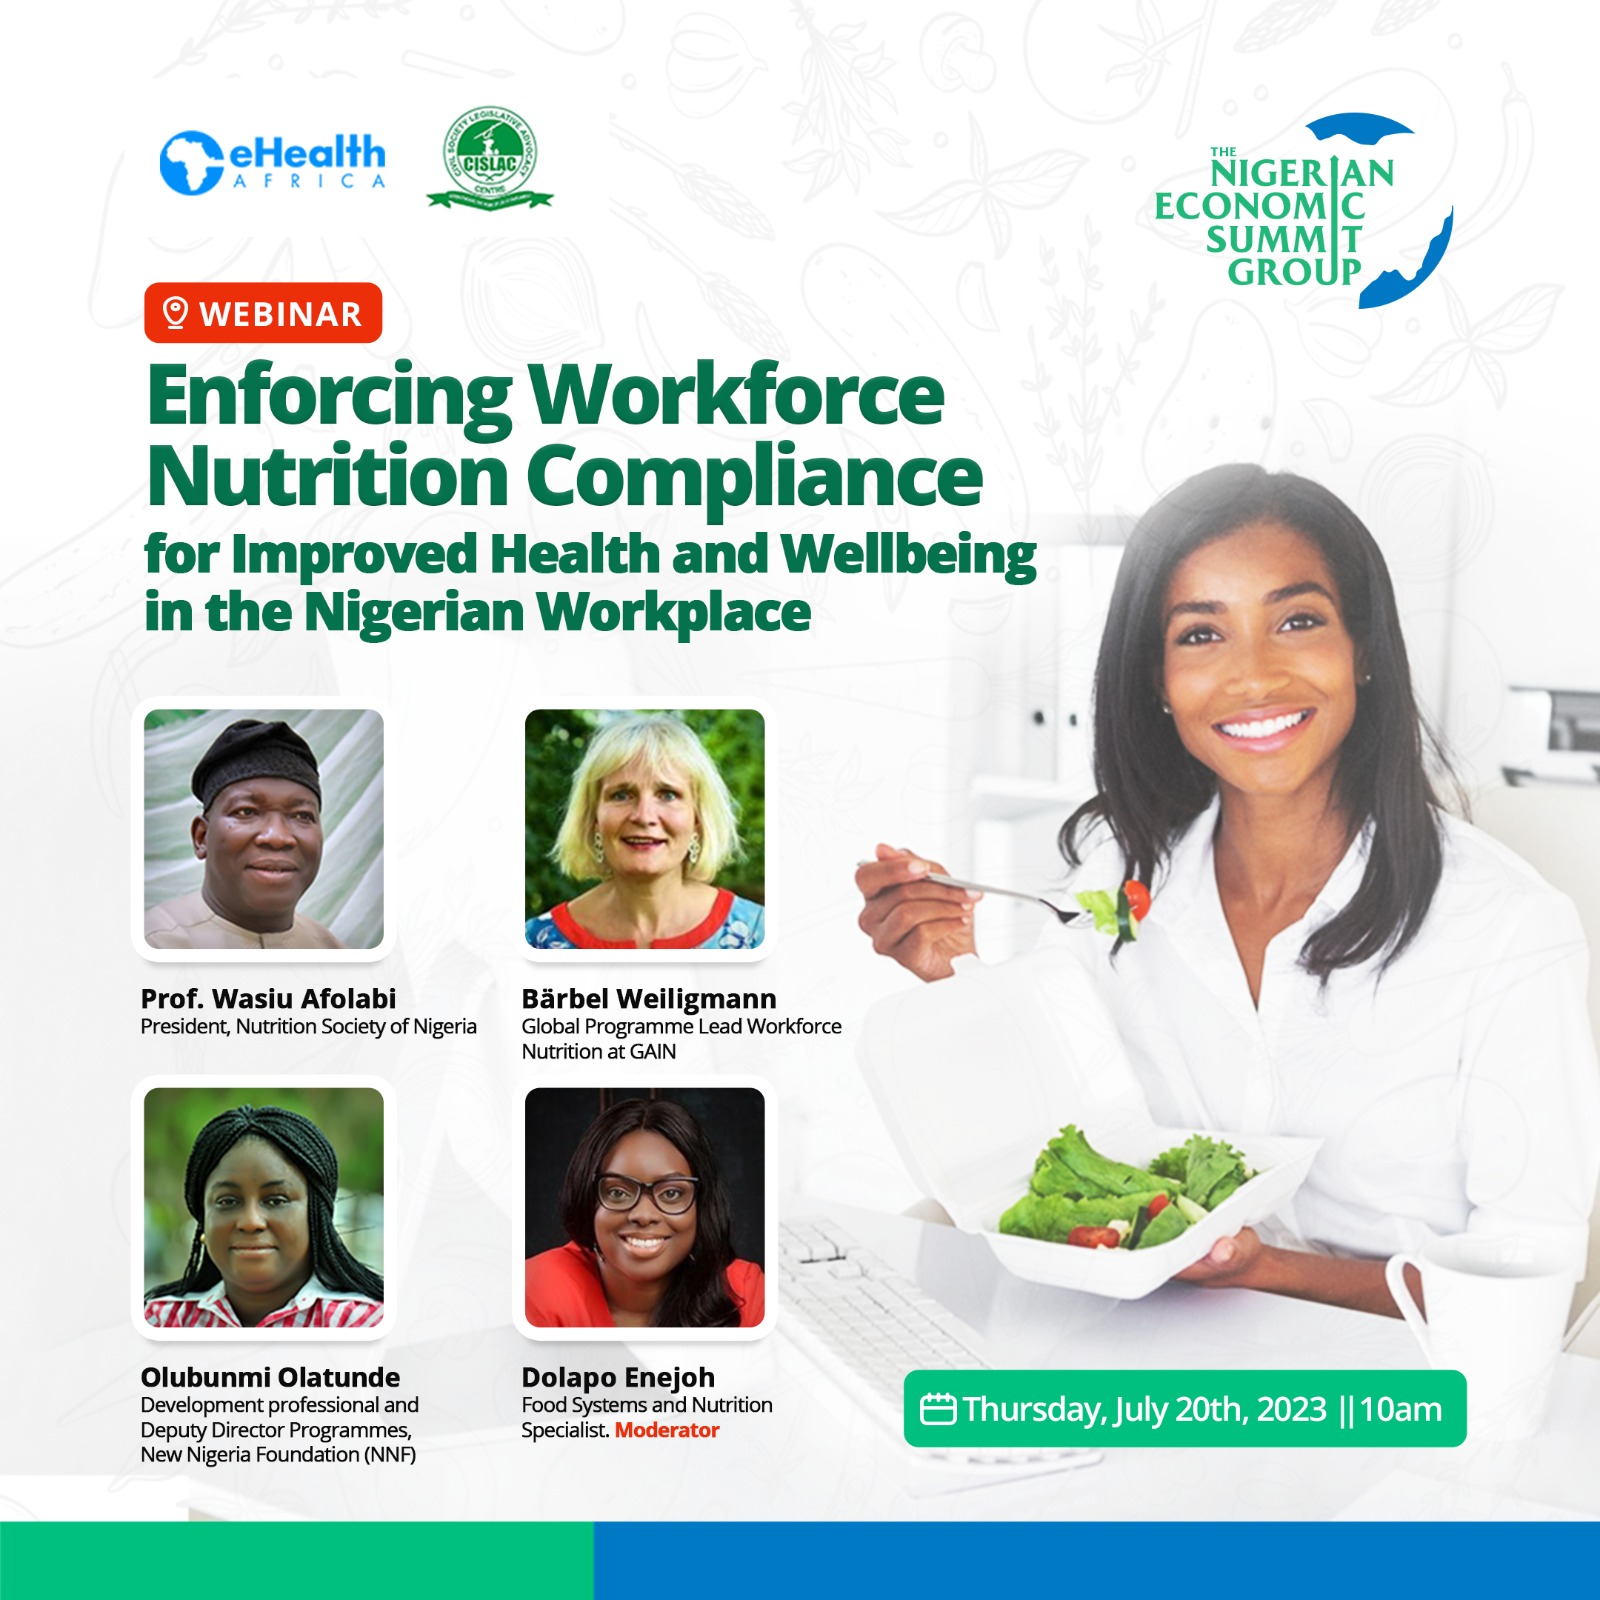 NESG Holds Webinar on Workforce Nutrition for Improved Health and Well-being